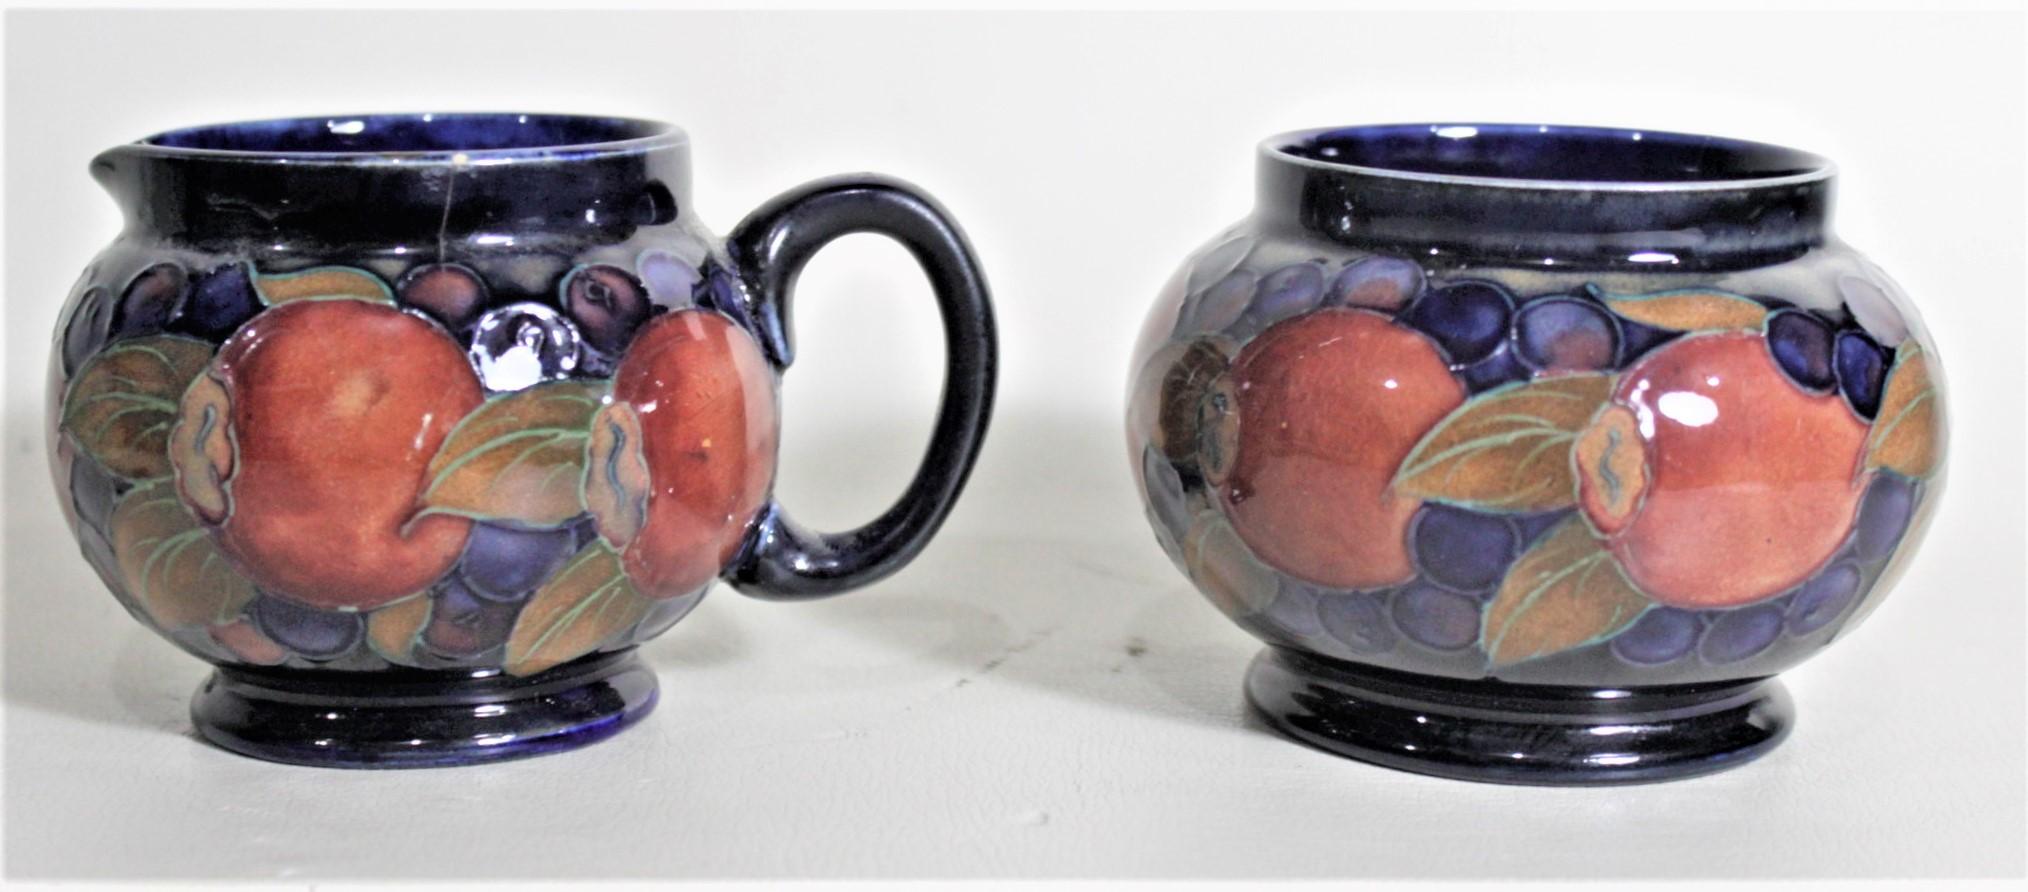 Hand-Crafted William Moorcroft Pomegranate Patterned Art Pottery Creamer and Sugar Bowl Set